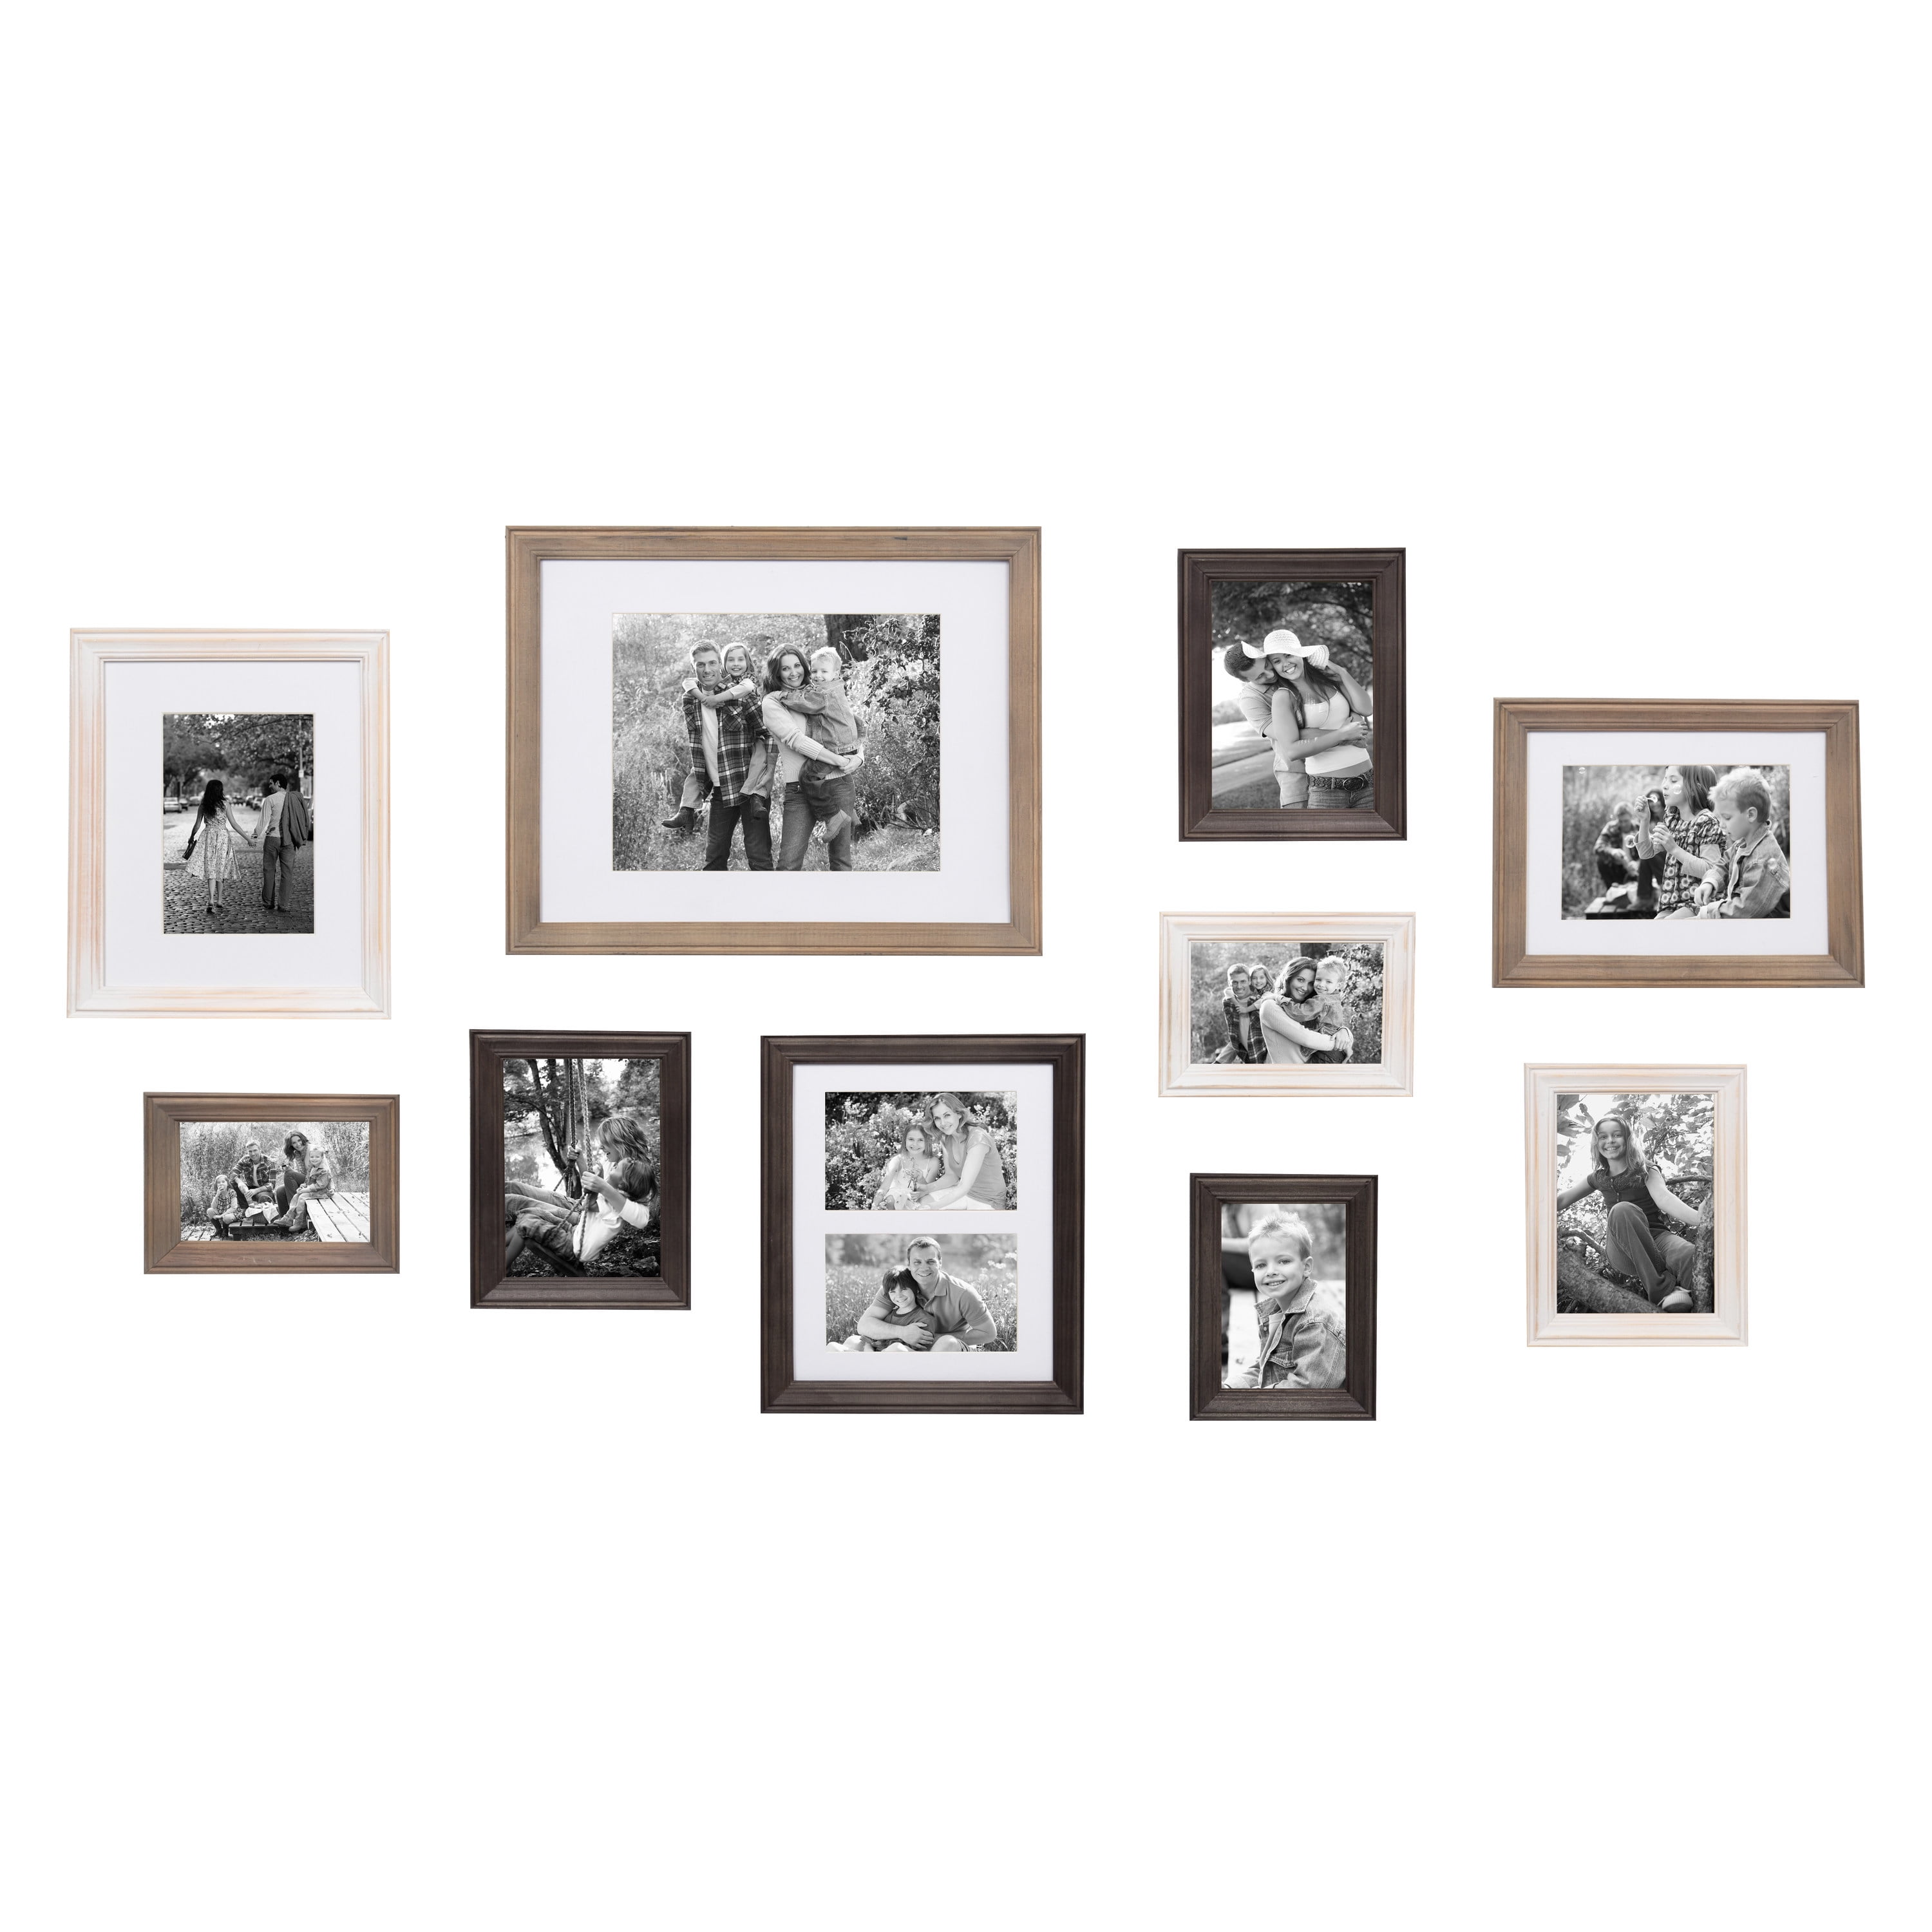 Kate and Laurel Bordeaux White Picture Frame (Set of 10) 213728